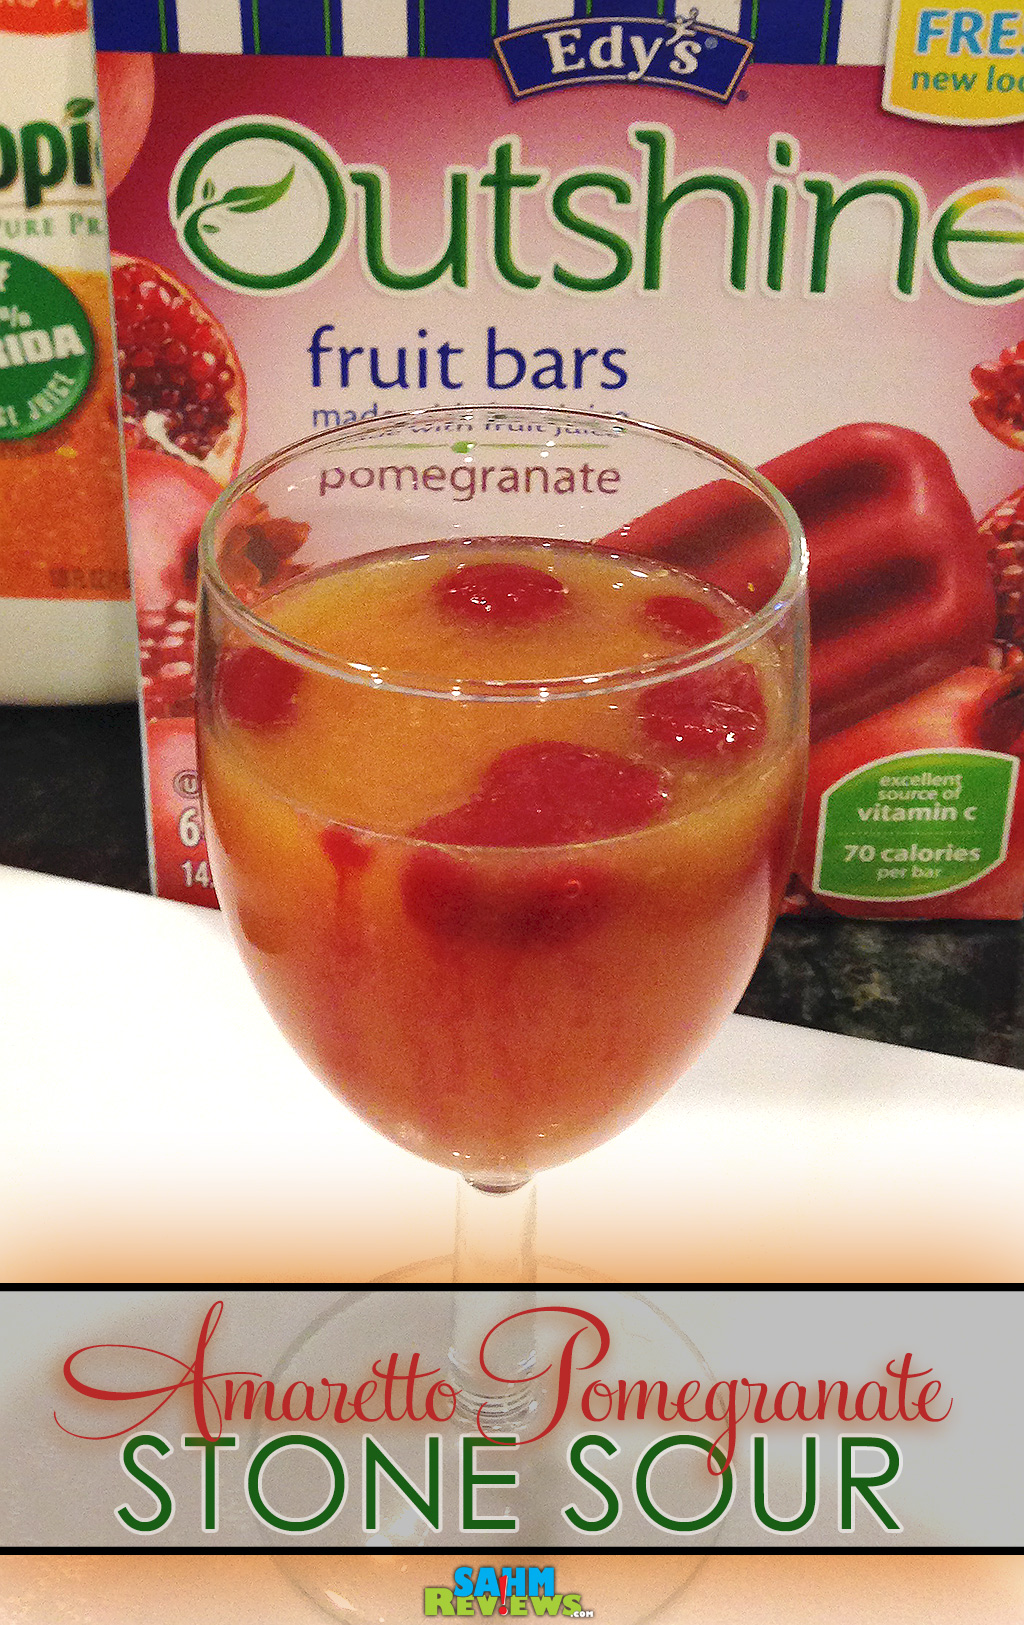 Add extra flavor to your mixed drinks by incorporating fruit "ice" cubes. This easy recipe for Amaretto Pomegranate Stone Sour is just one of the flavorful drinks we upscaled using Outshine Fruit Bars. --SahmReviews.com